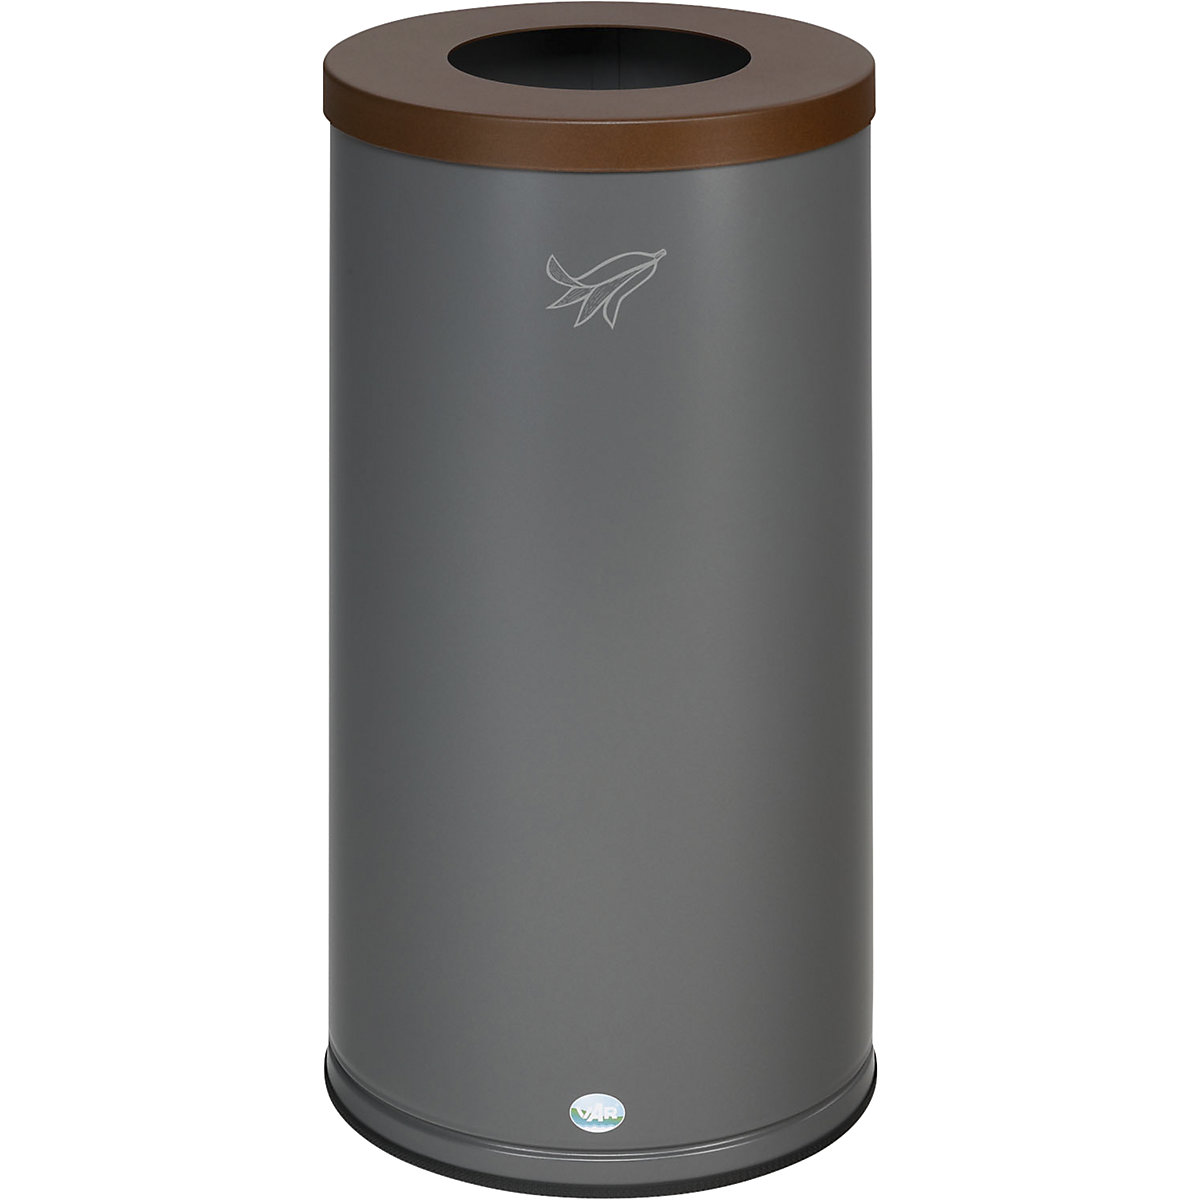 Recyclable waste collector, brown – eurokraft basic